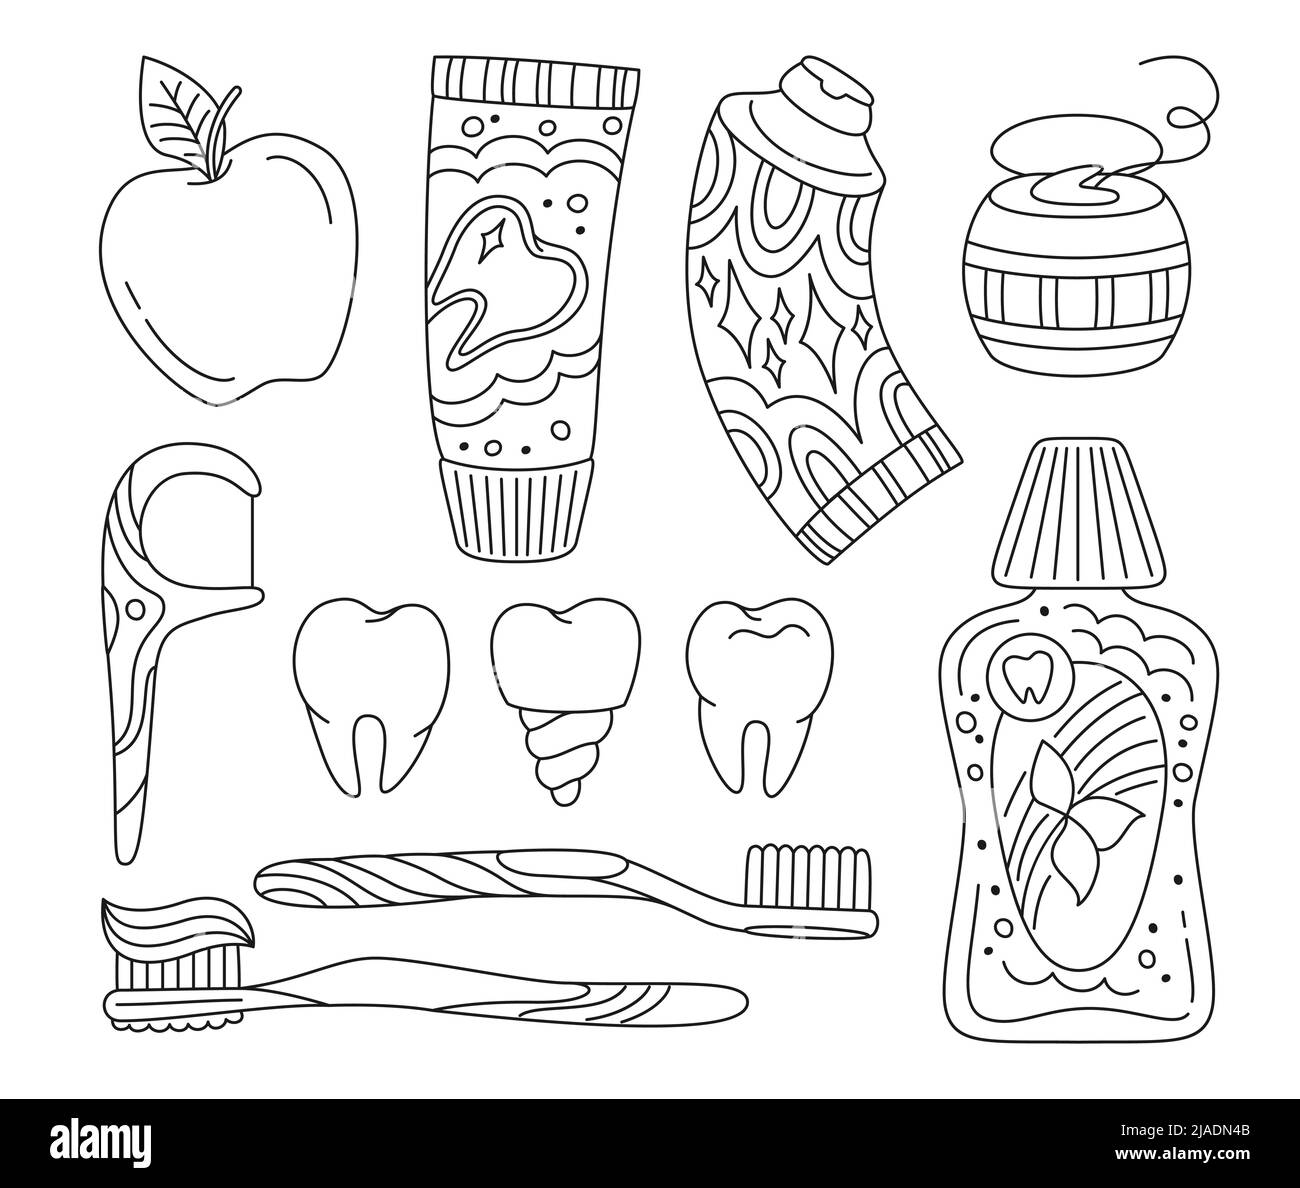 Dental tools line doodle set. Healthy tooth, dentistry implant, toothbrushes, toothpaste, dental floss, mouthwash. Mouth cleaning, healthcare oral hygiene symbol, clean teeth. Orthodontic concept Stock Vector